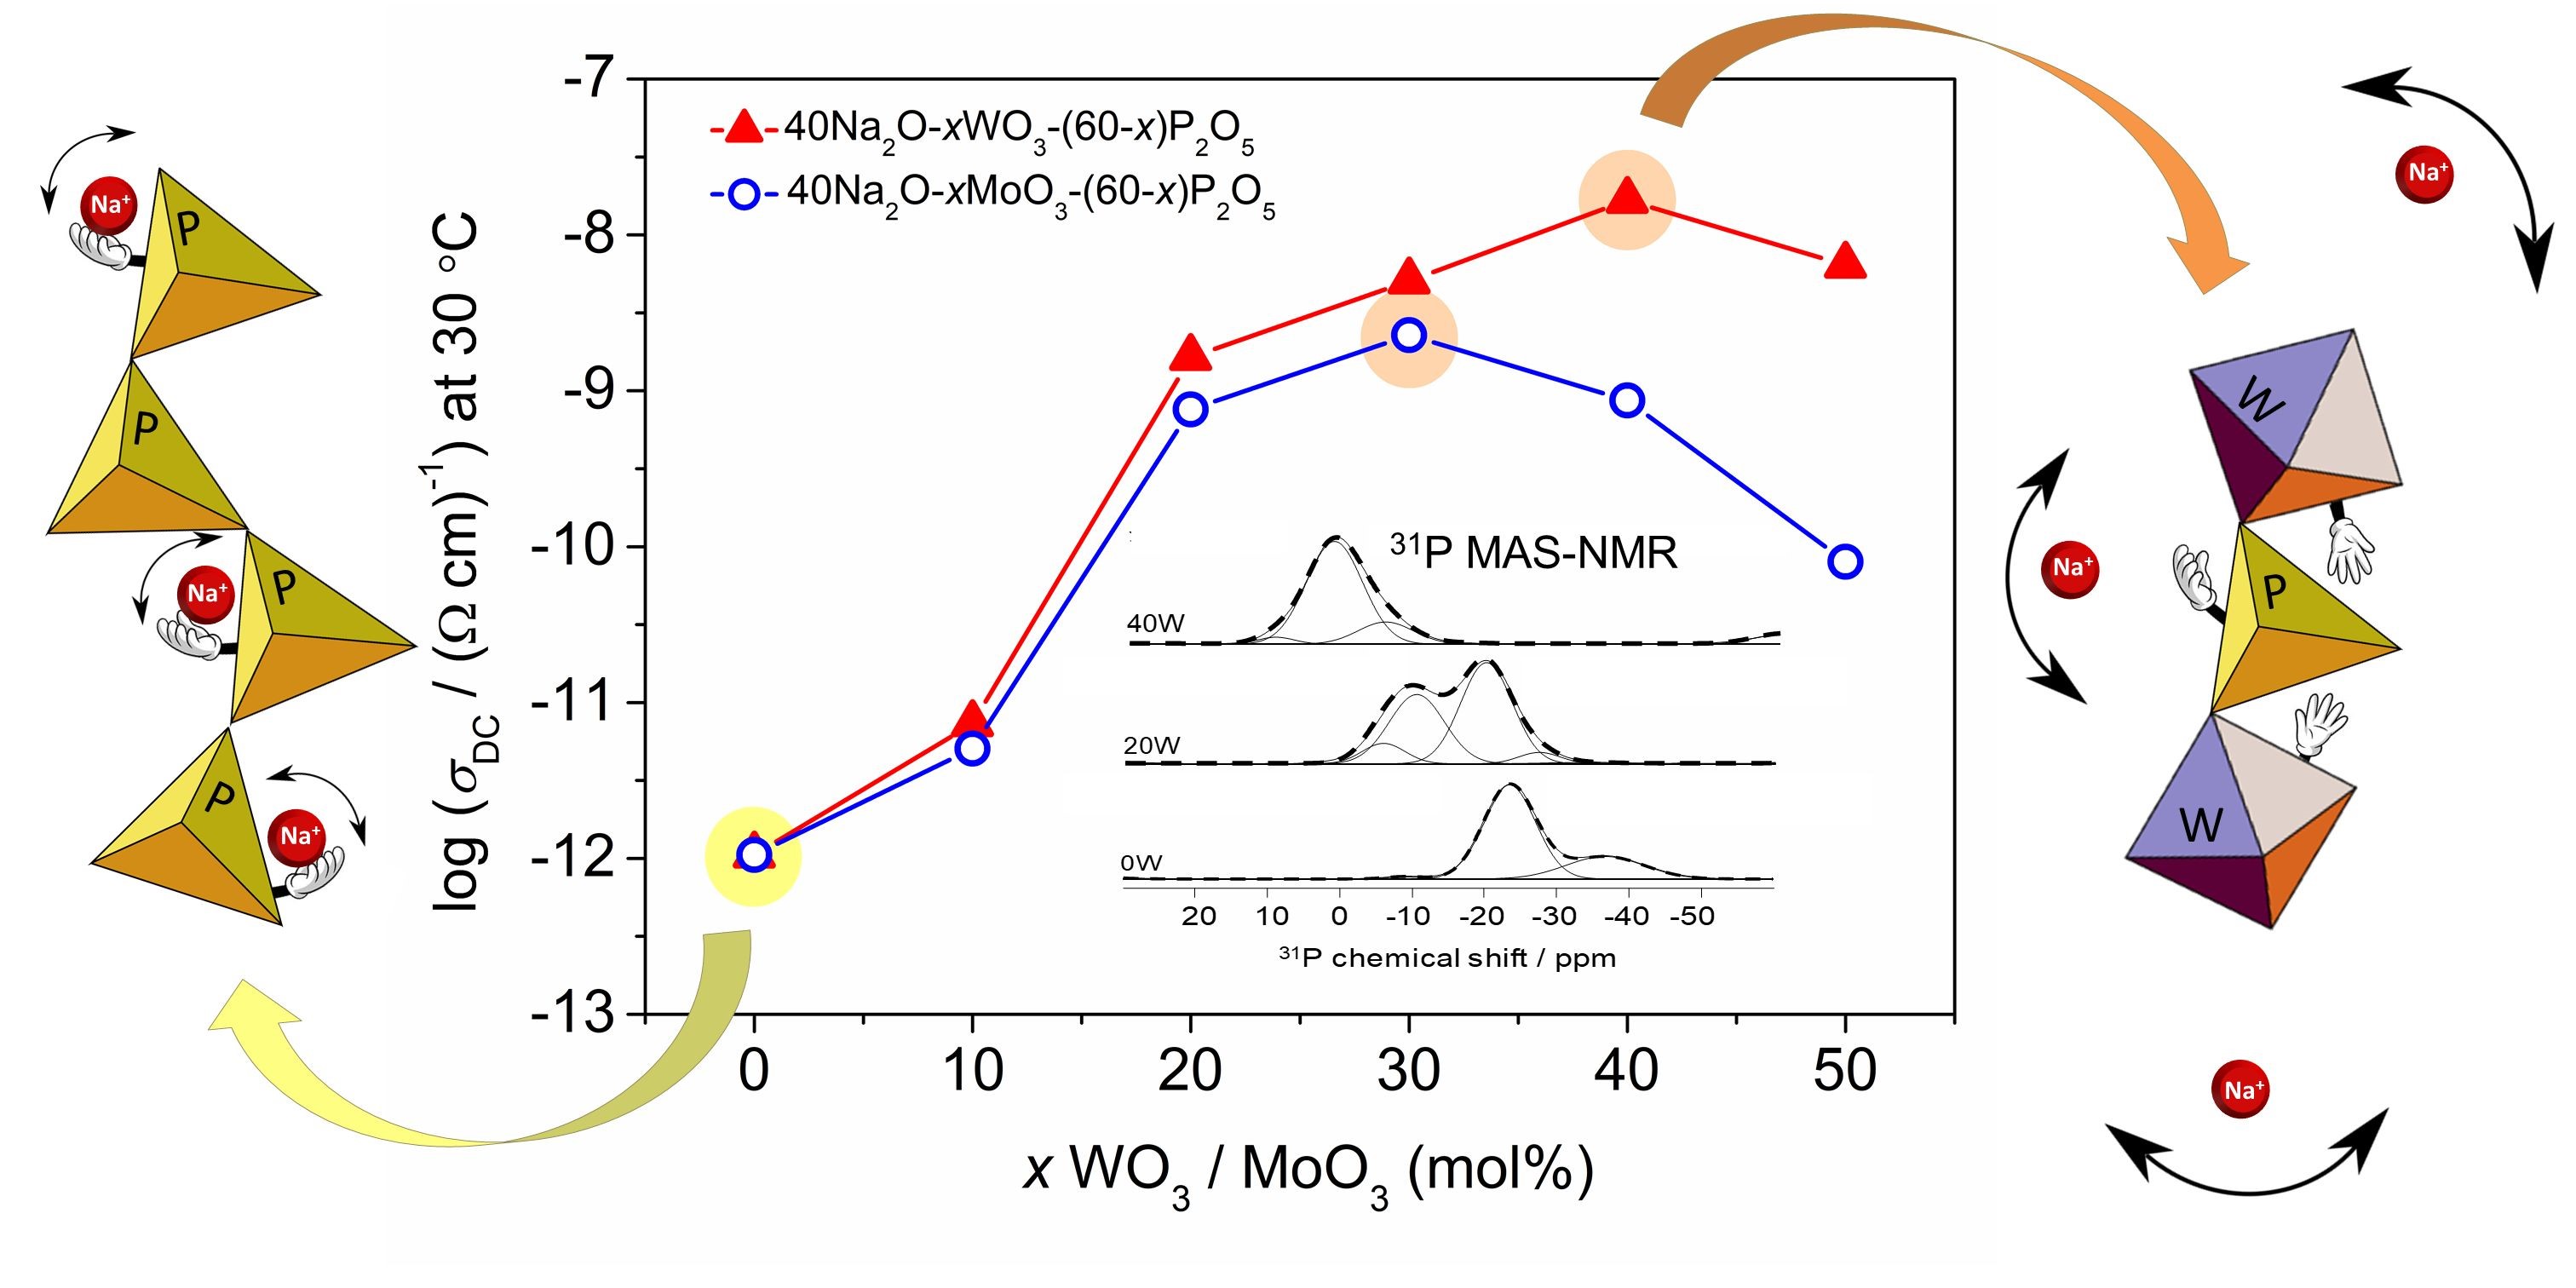 A significant enhancement of sodium ion conductivity in phosphate glasses by addition of WO3 and MoO3: the effect of mixed conventional–conditional glass-forming oxides